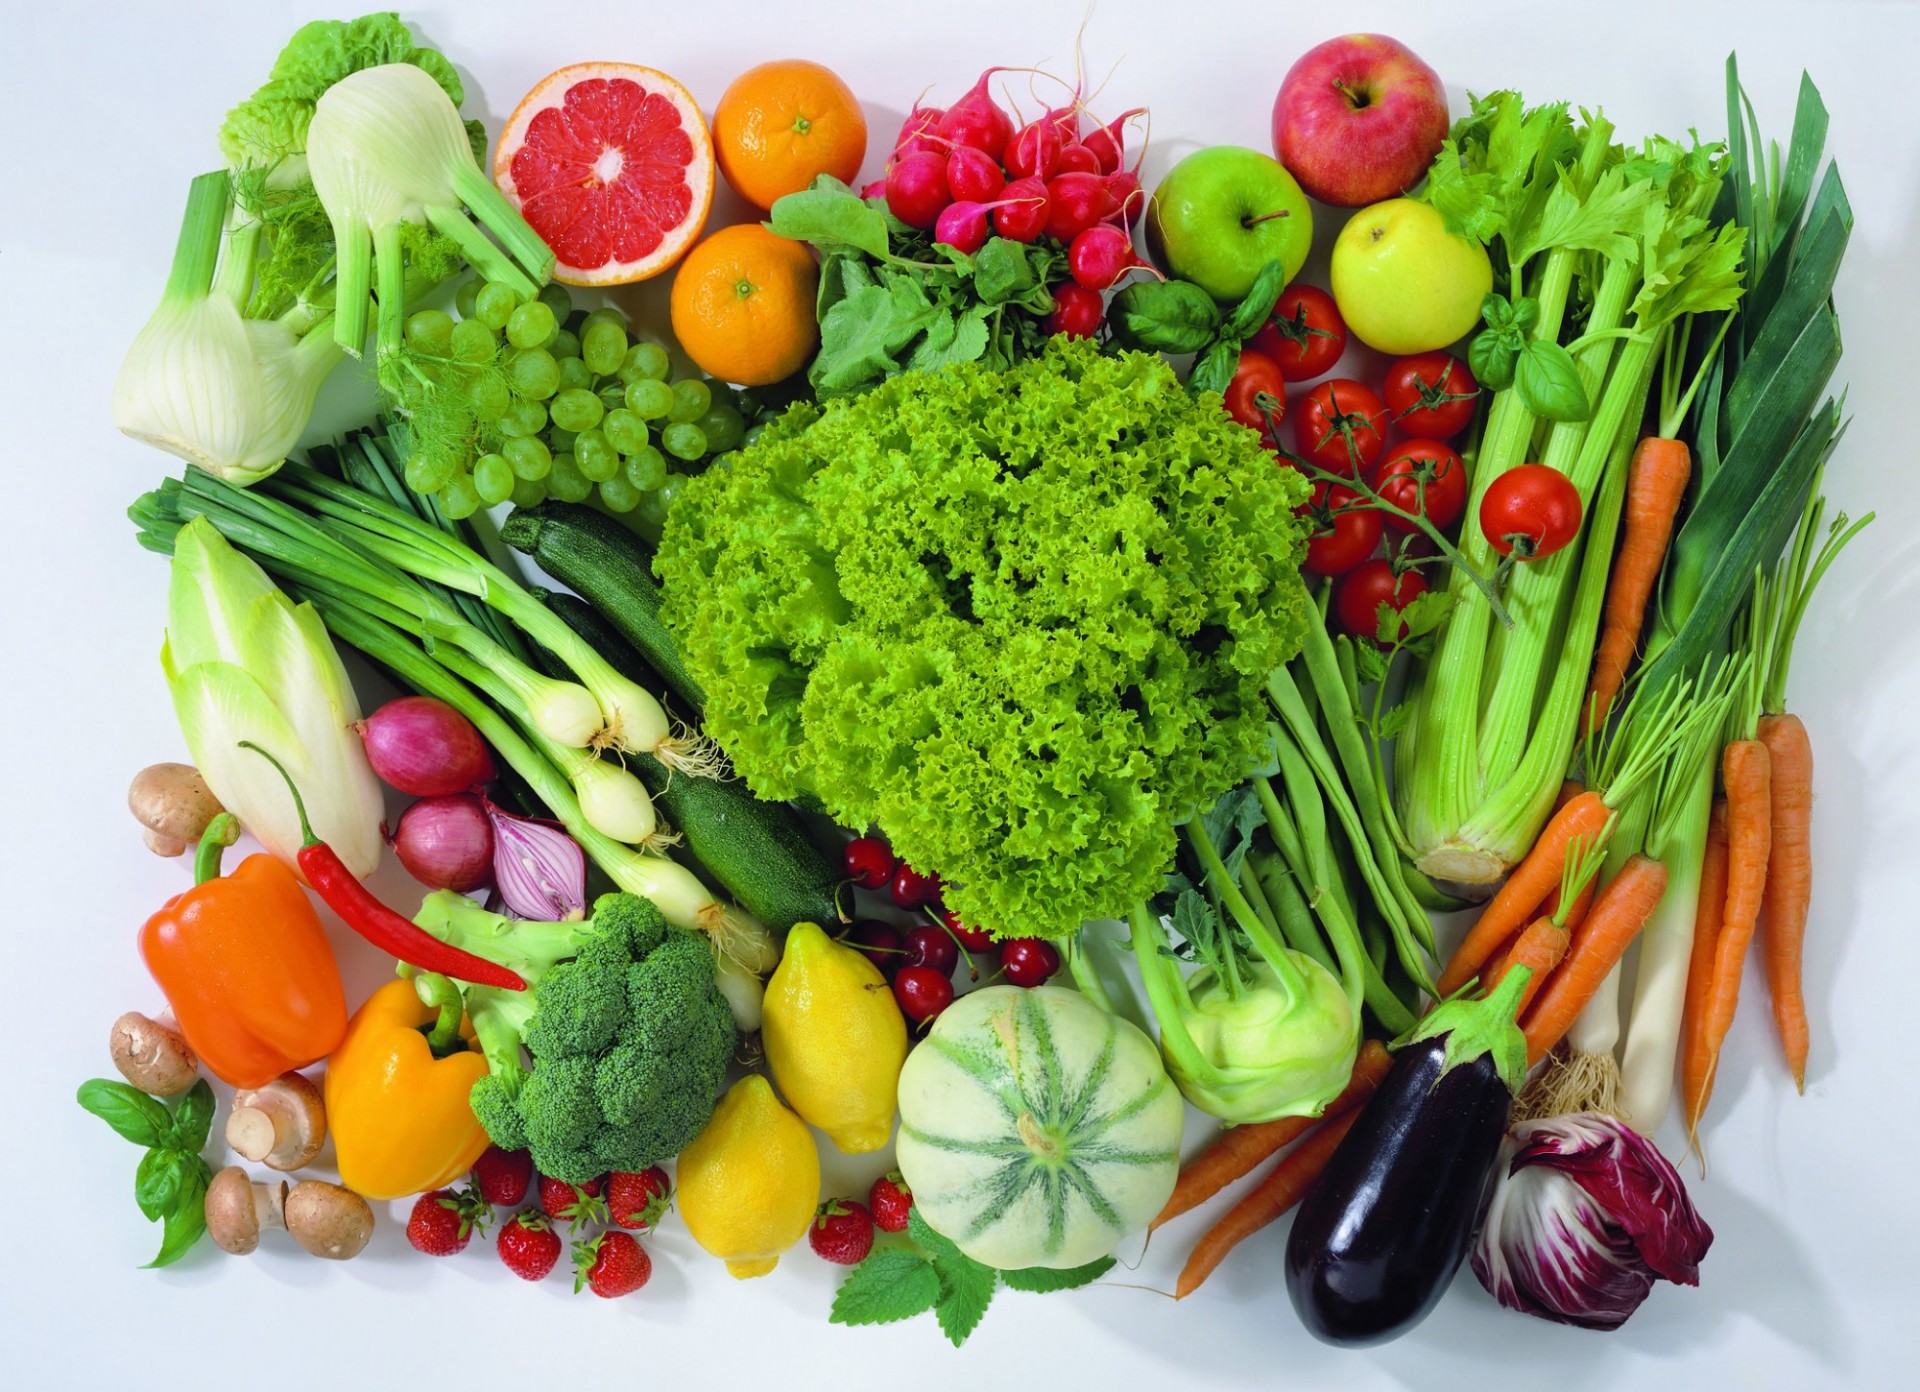 Nicely arranged pile of vegetables